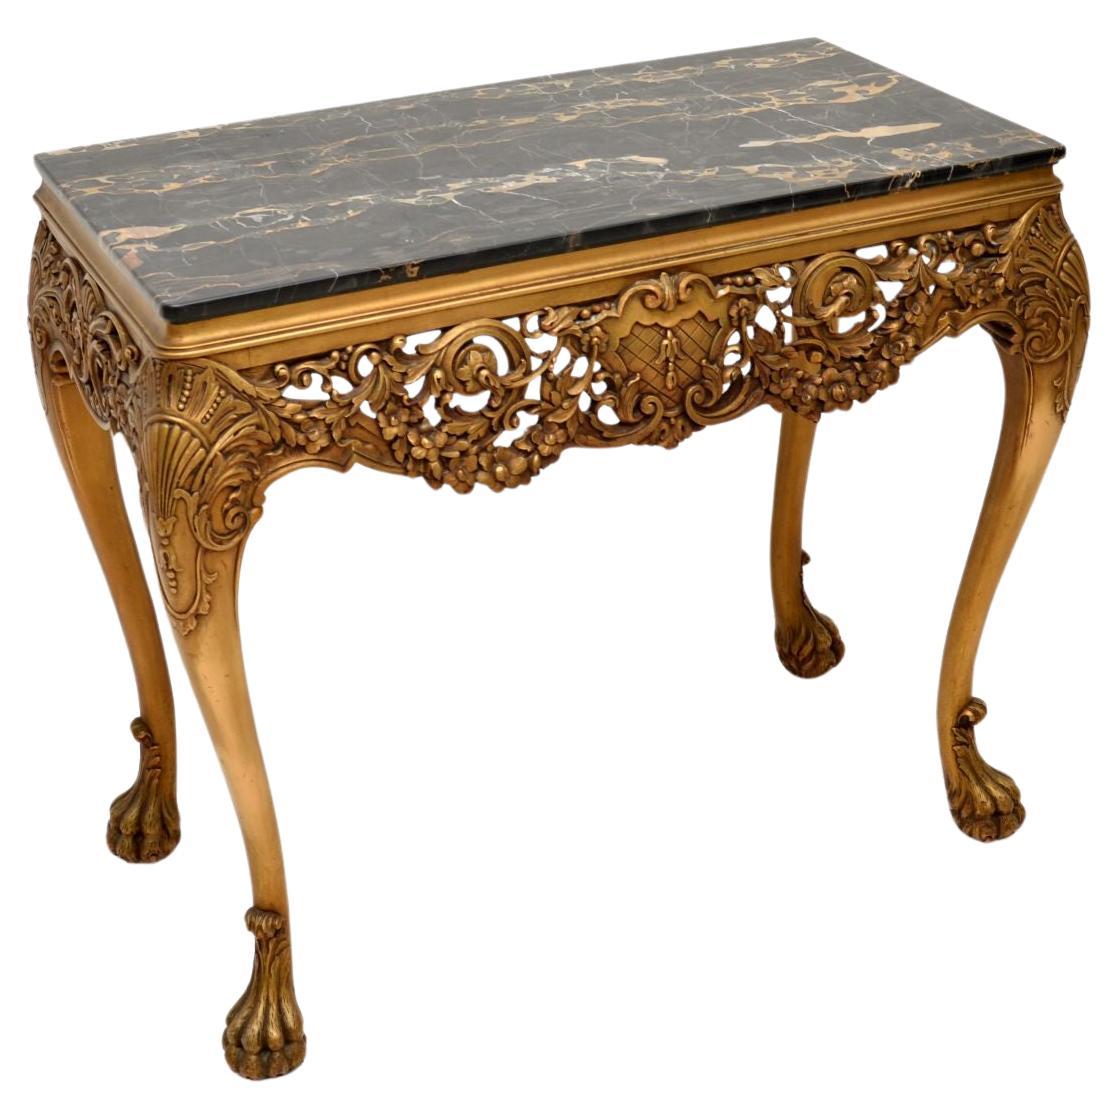 Antique William Kent Style Marble Top Gilt Wood Side Table For Sale